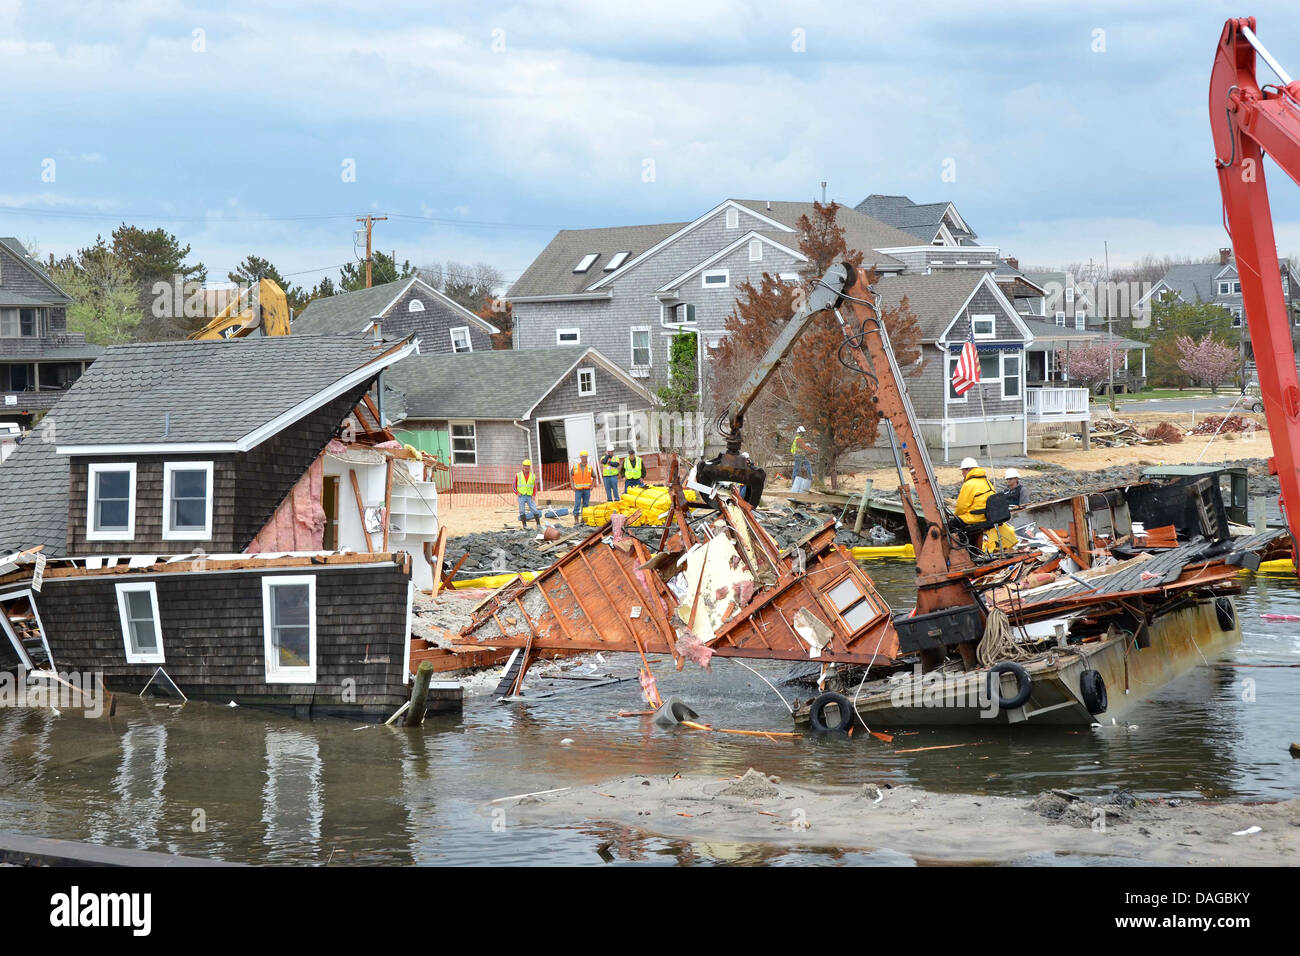 Workers demolish a home destroyed by Hurricane Sandy May 9, 2013 in Mantoloking, New Jersey. Stock Photo